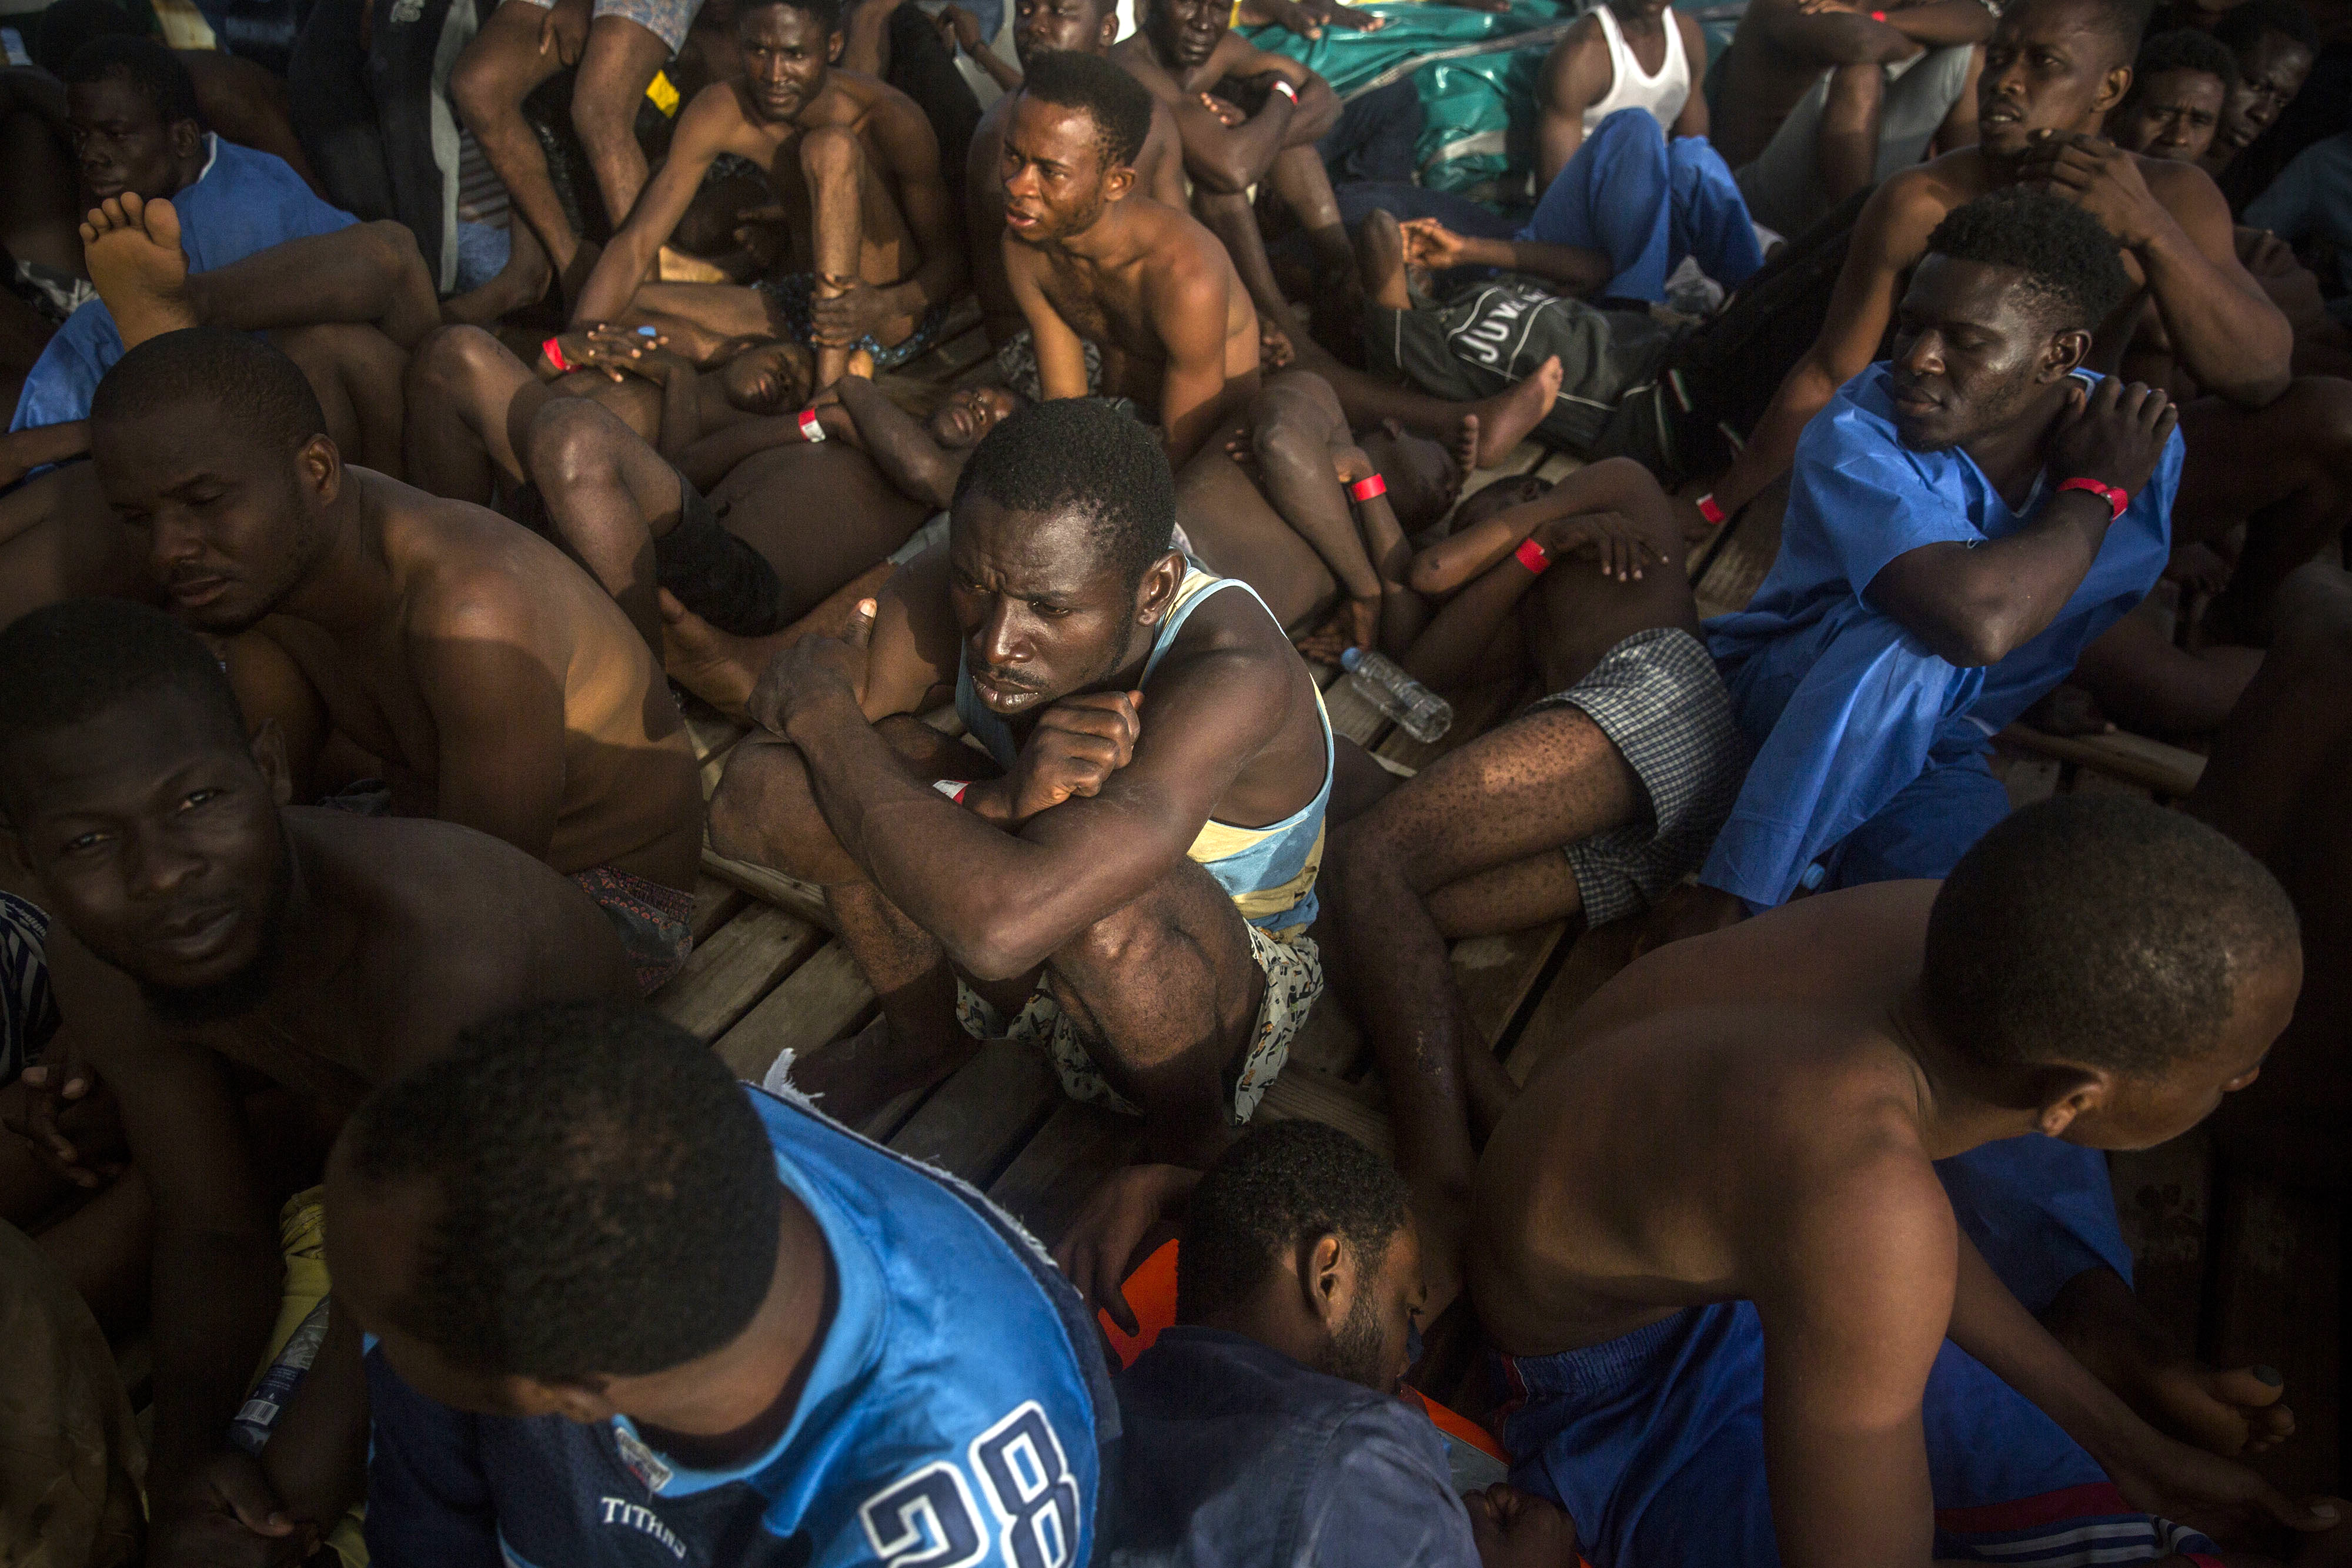 Sub saharan migrants sit on the deck of the vessel of Proactiva Open Arms after being rescued in the Mediterranean Sea, about 15 miles north of Sabratha, Libya on Tuesday, July 25, 2017. More than 120 migrants were rescued Tuesday from the Mediterranean Sea while 13 more —including pregnant women and children— died in a crammed rubber raft, according to a Spanish rescue group. (AP Photo/Santi Palacios)